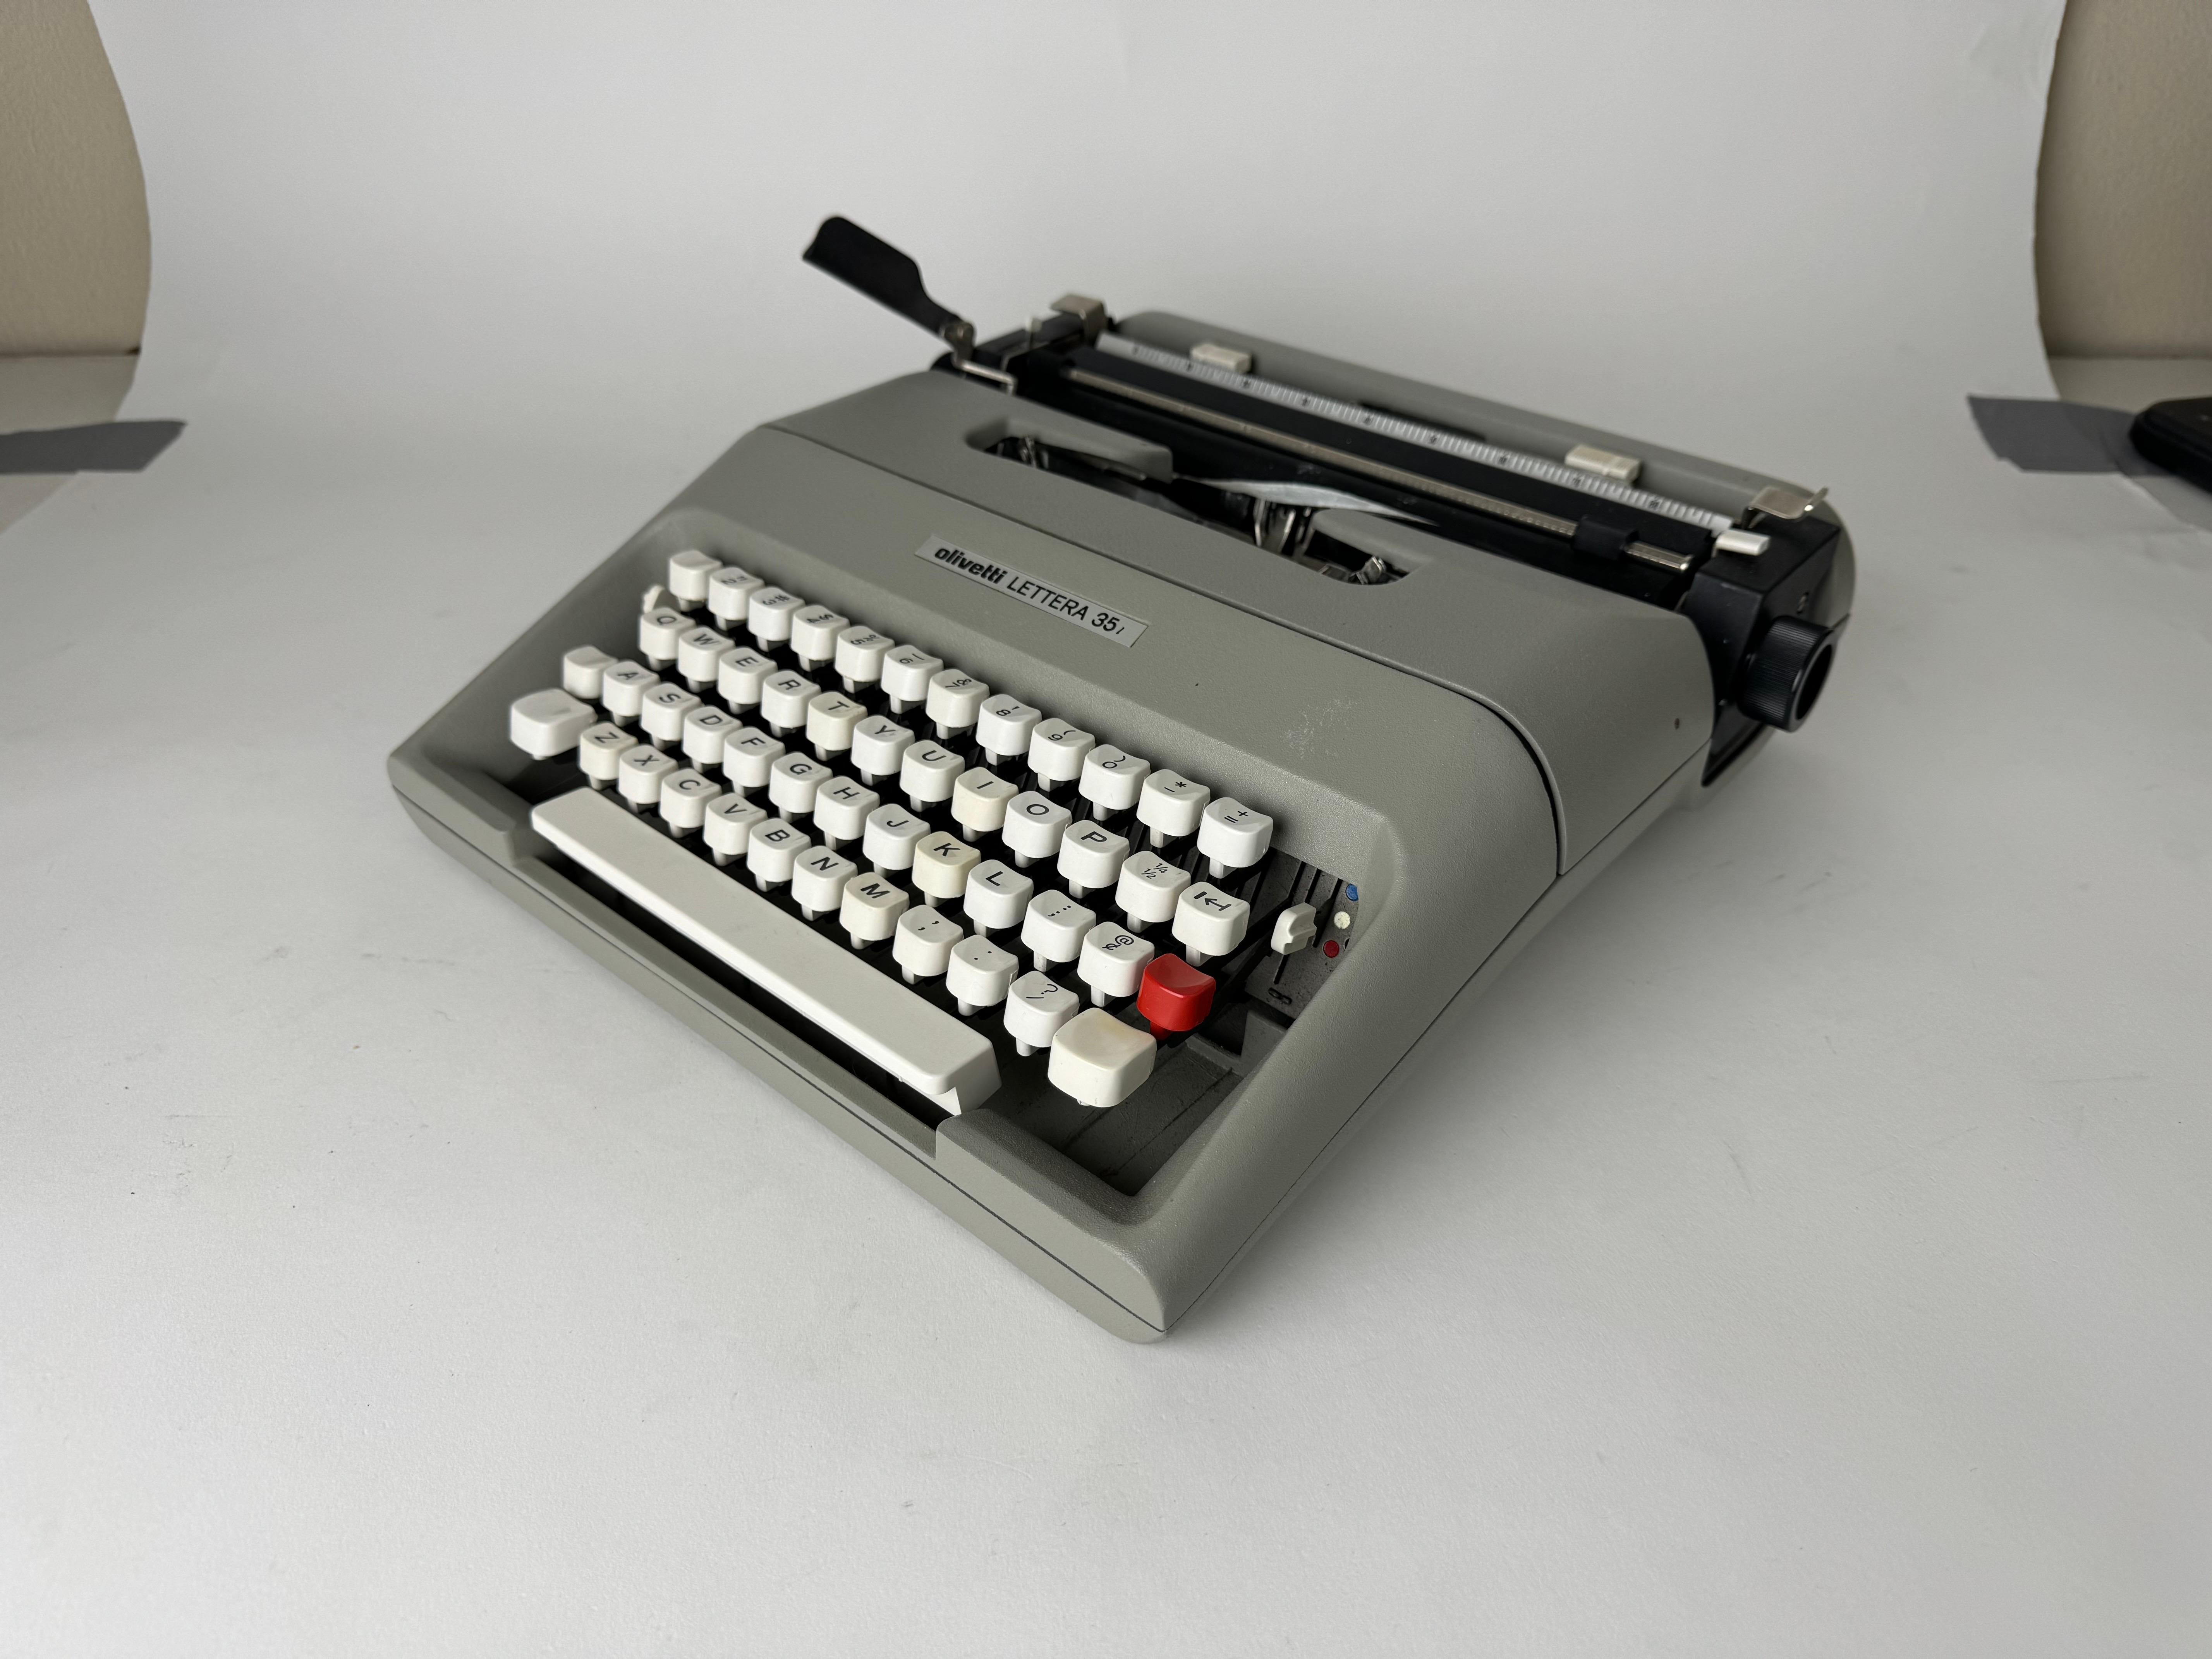 Beautiful vintage 1970's Olivetti Lettera 35 typewriter, made in Italy. This typewriter comes with a very cool vintage Olivetti shoulder bag.

This typewriter is in very good cosmetic and structural condition with a few age appropriate signs of wear